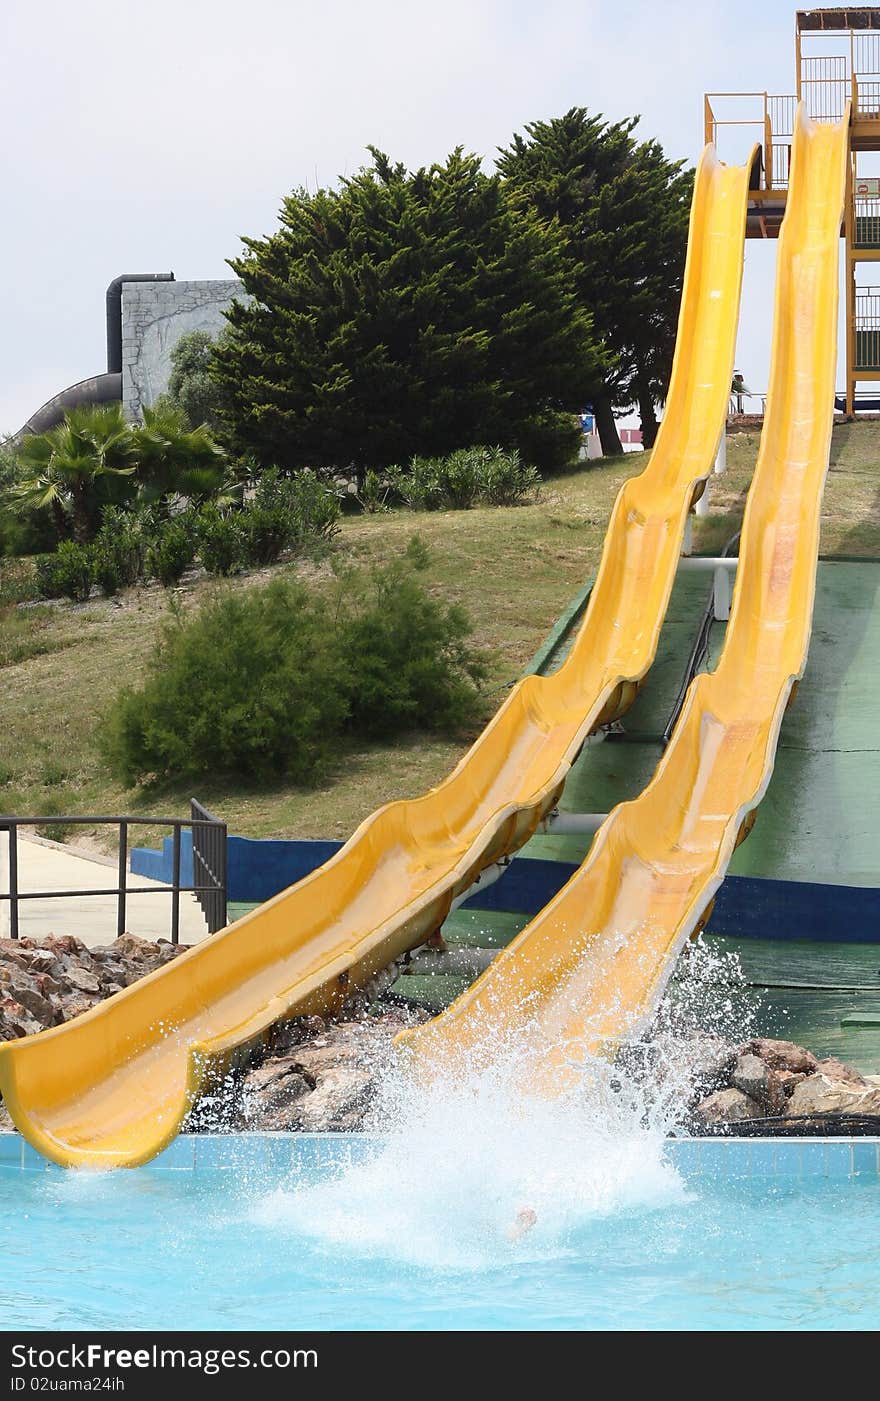 Two yellow slides in the water park. Two yellow slides in the water park